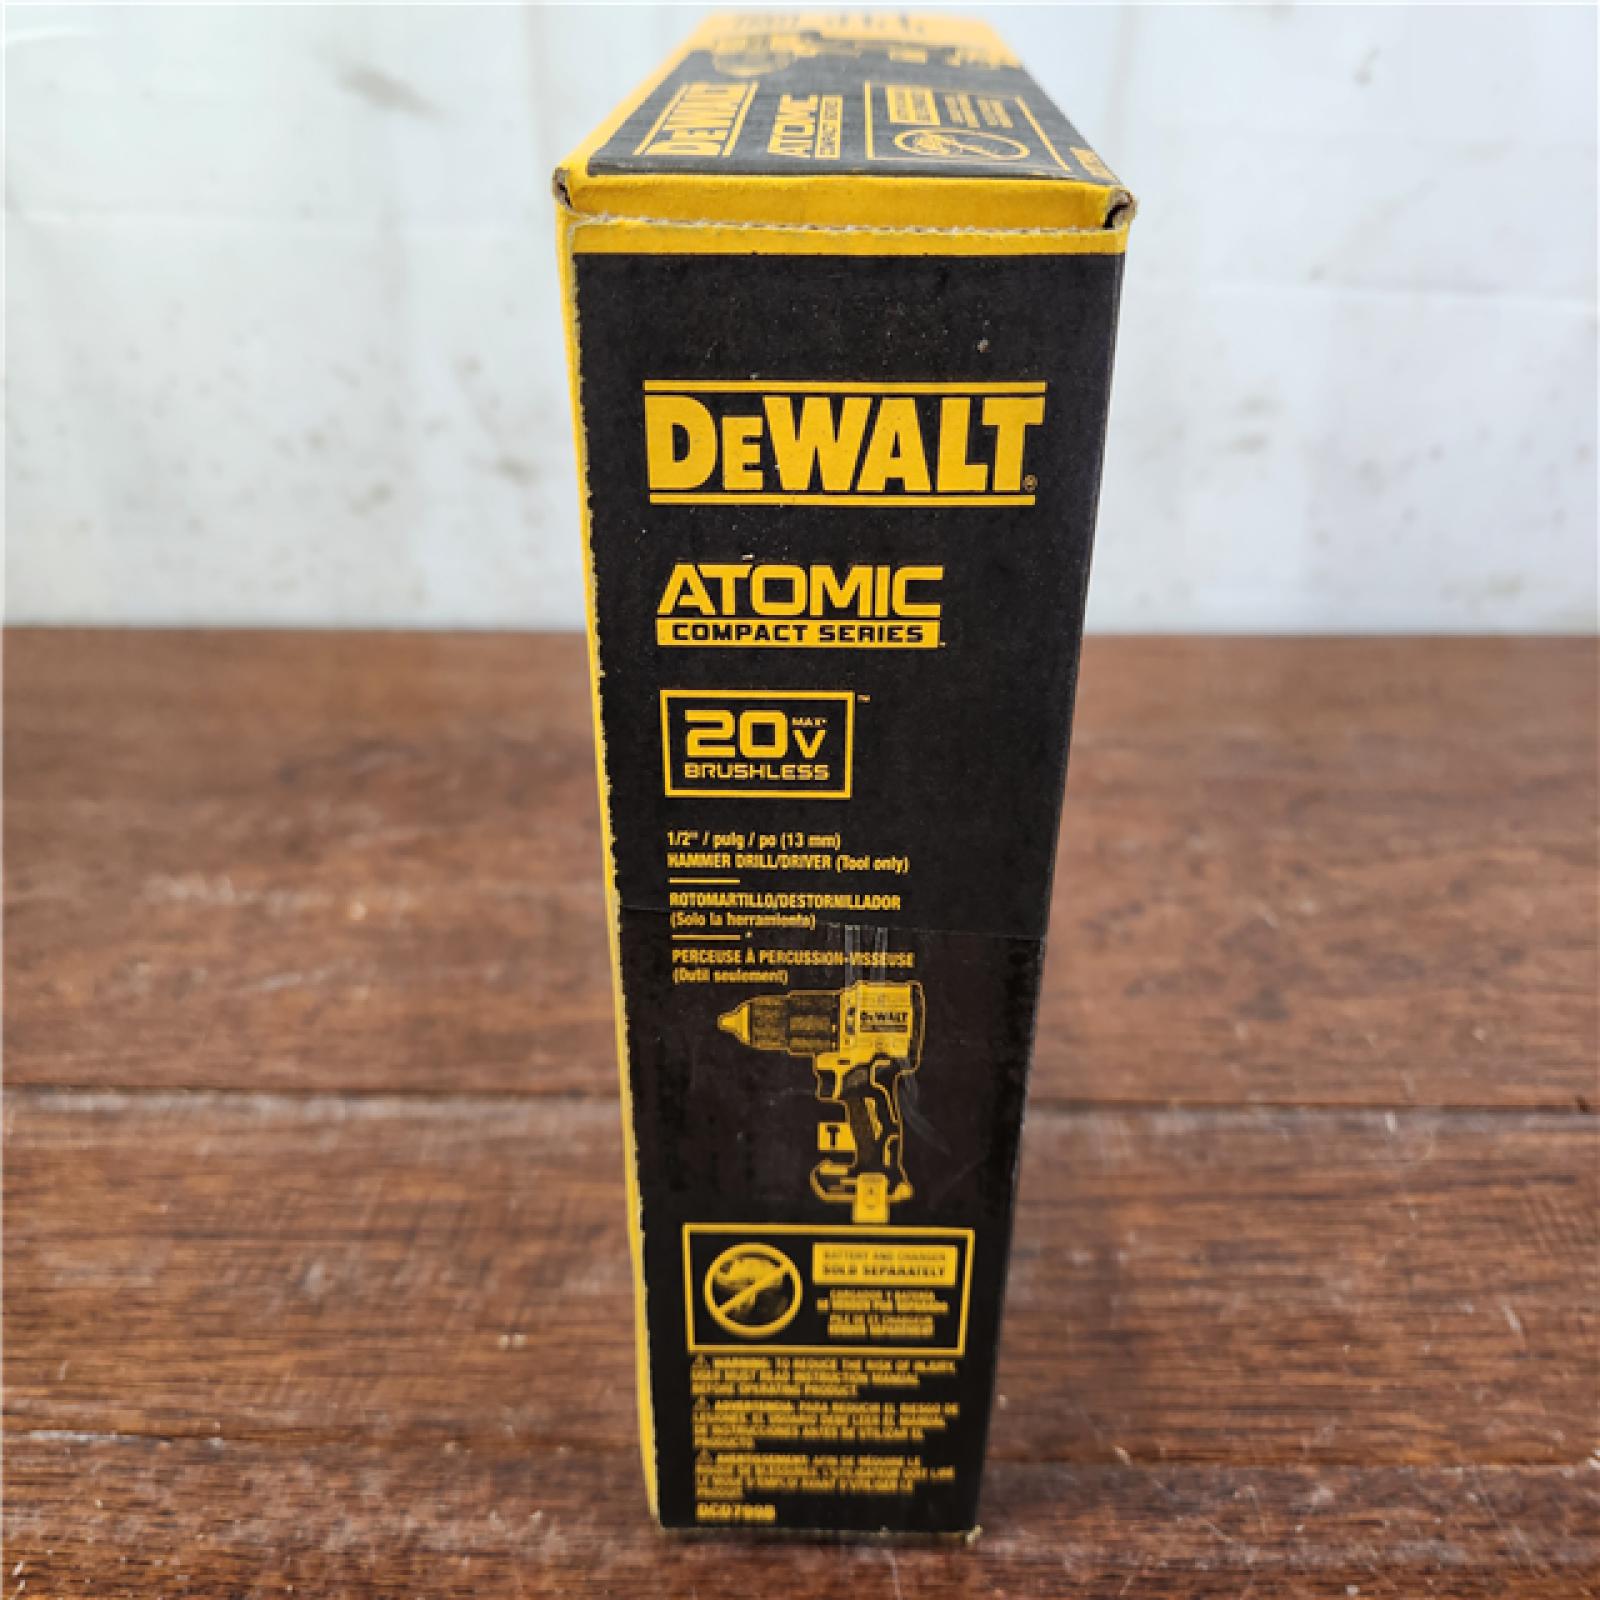 NEW! DeWalt 20V MAX Atomic Brushless Cordless Compact 1/2 in Hammer Drill (Tool Only)